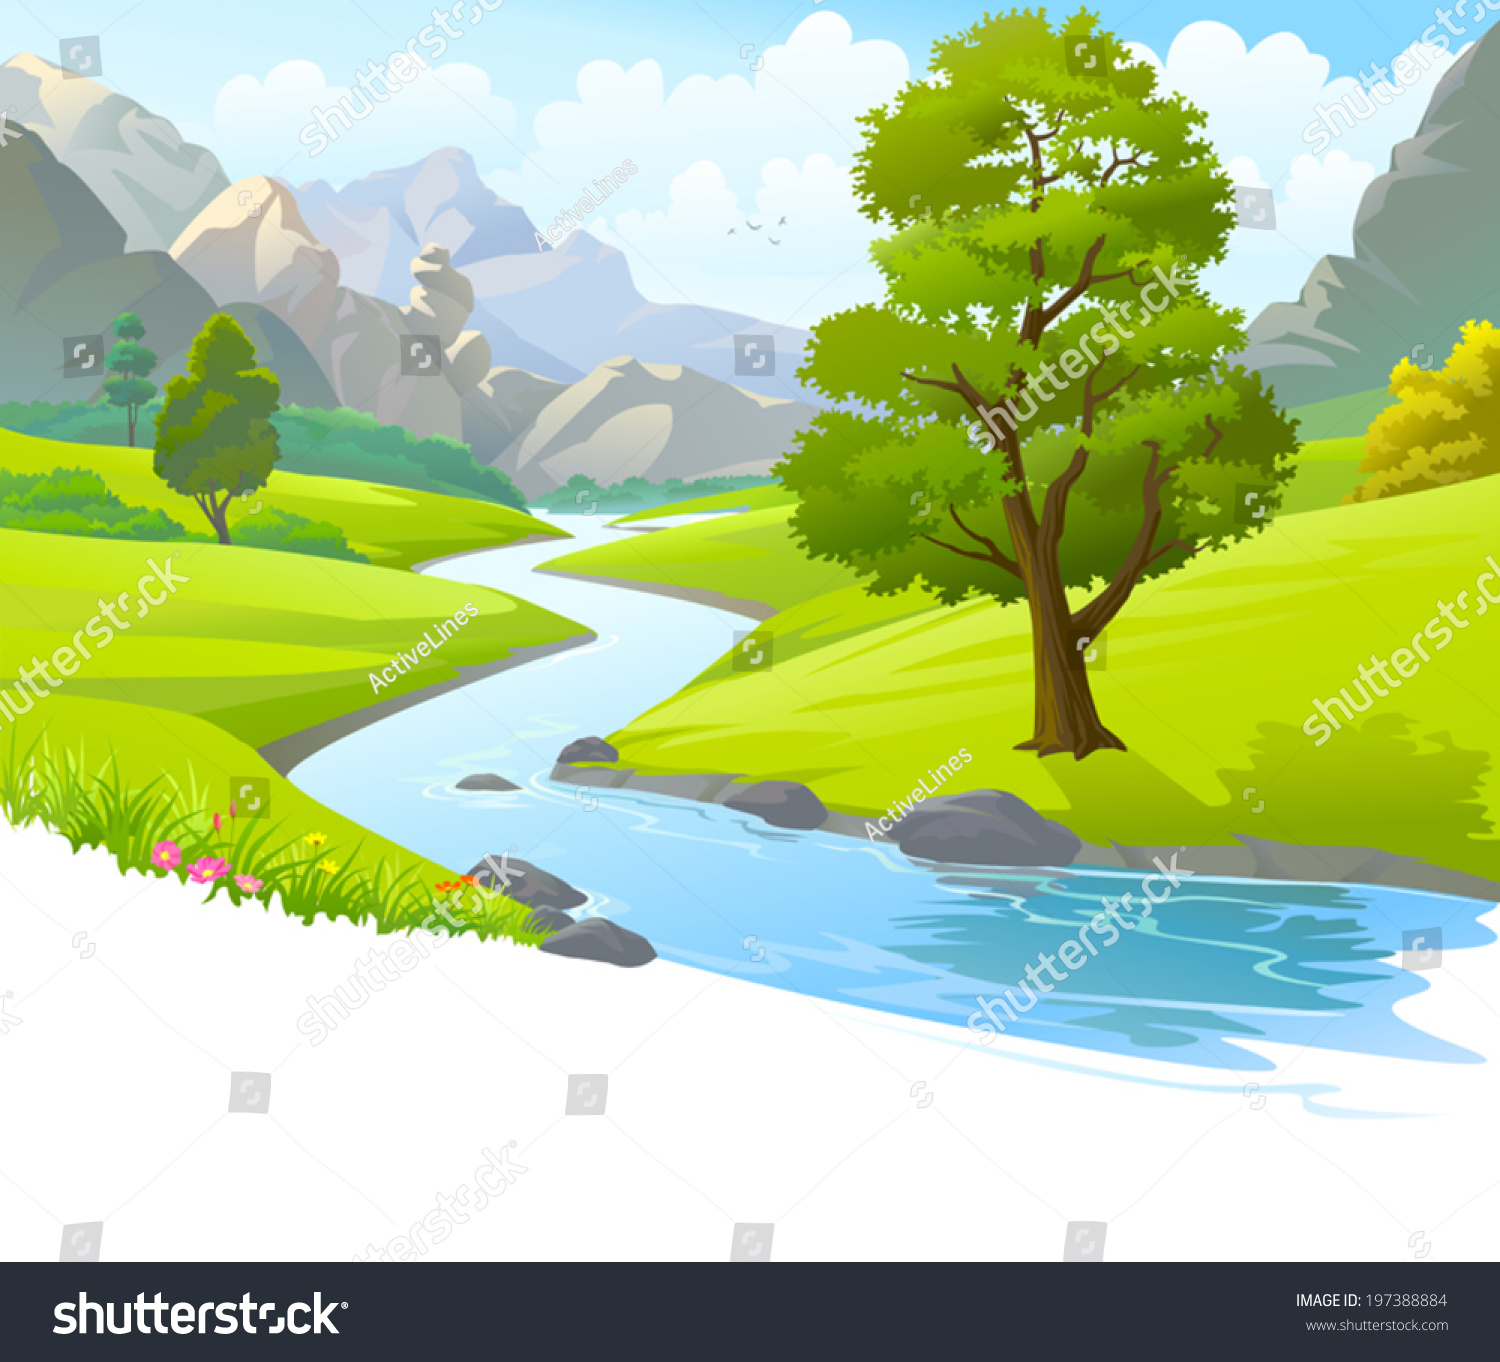 An Illustration Of A River Flowing Through Mountains, Hills And Through ...